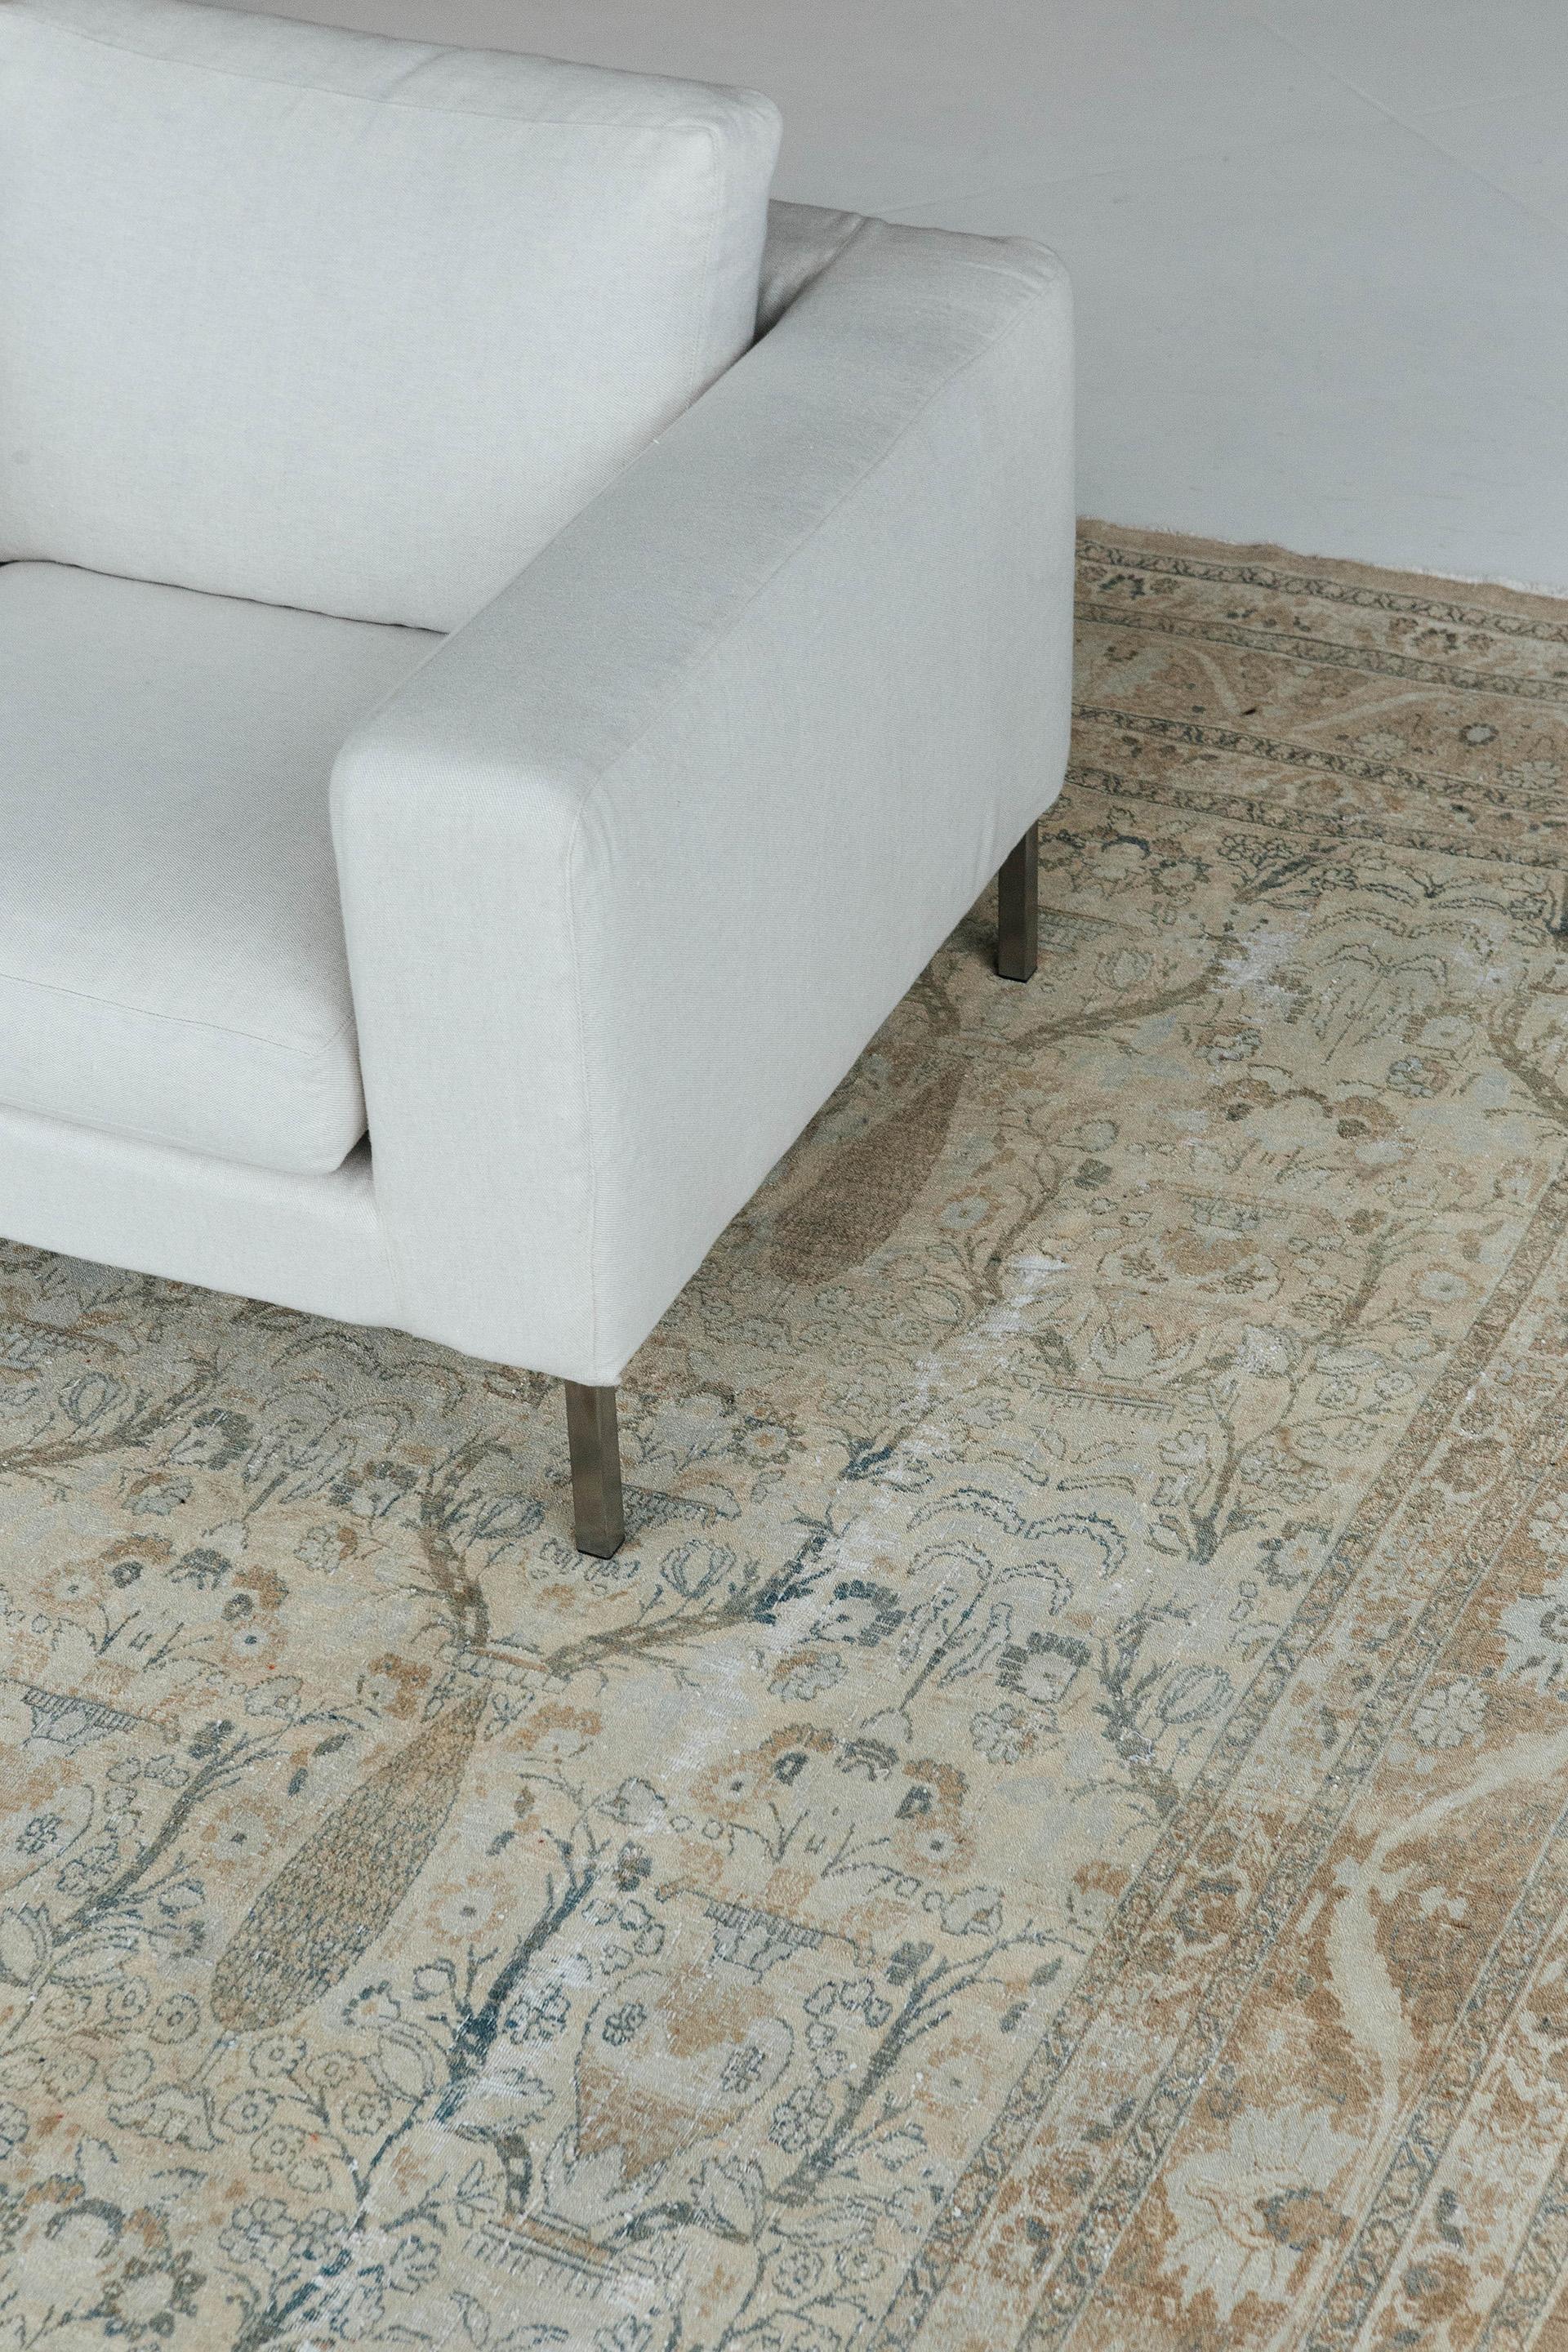 Antique Tabriz in soft warm tans and teal gray accents in the style of Hadji Jalil, a legendary designer of courtly rugs. All-over field pattern, organized in rows, features vase elements and cyprus trees. Border features undulating vine and